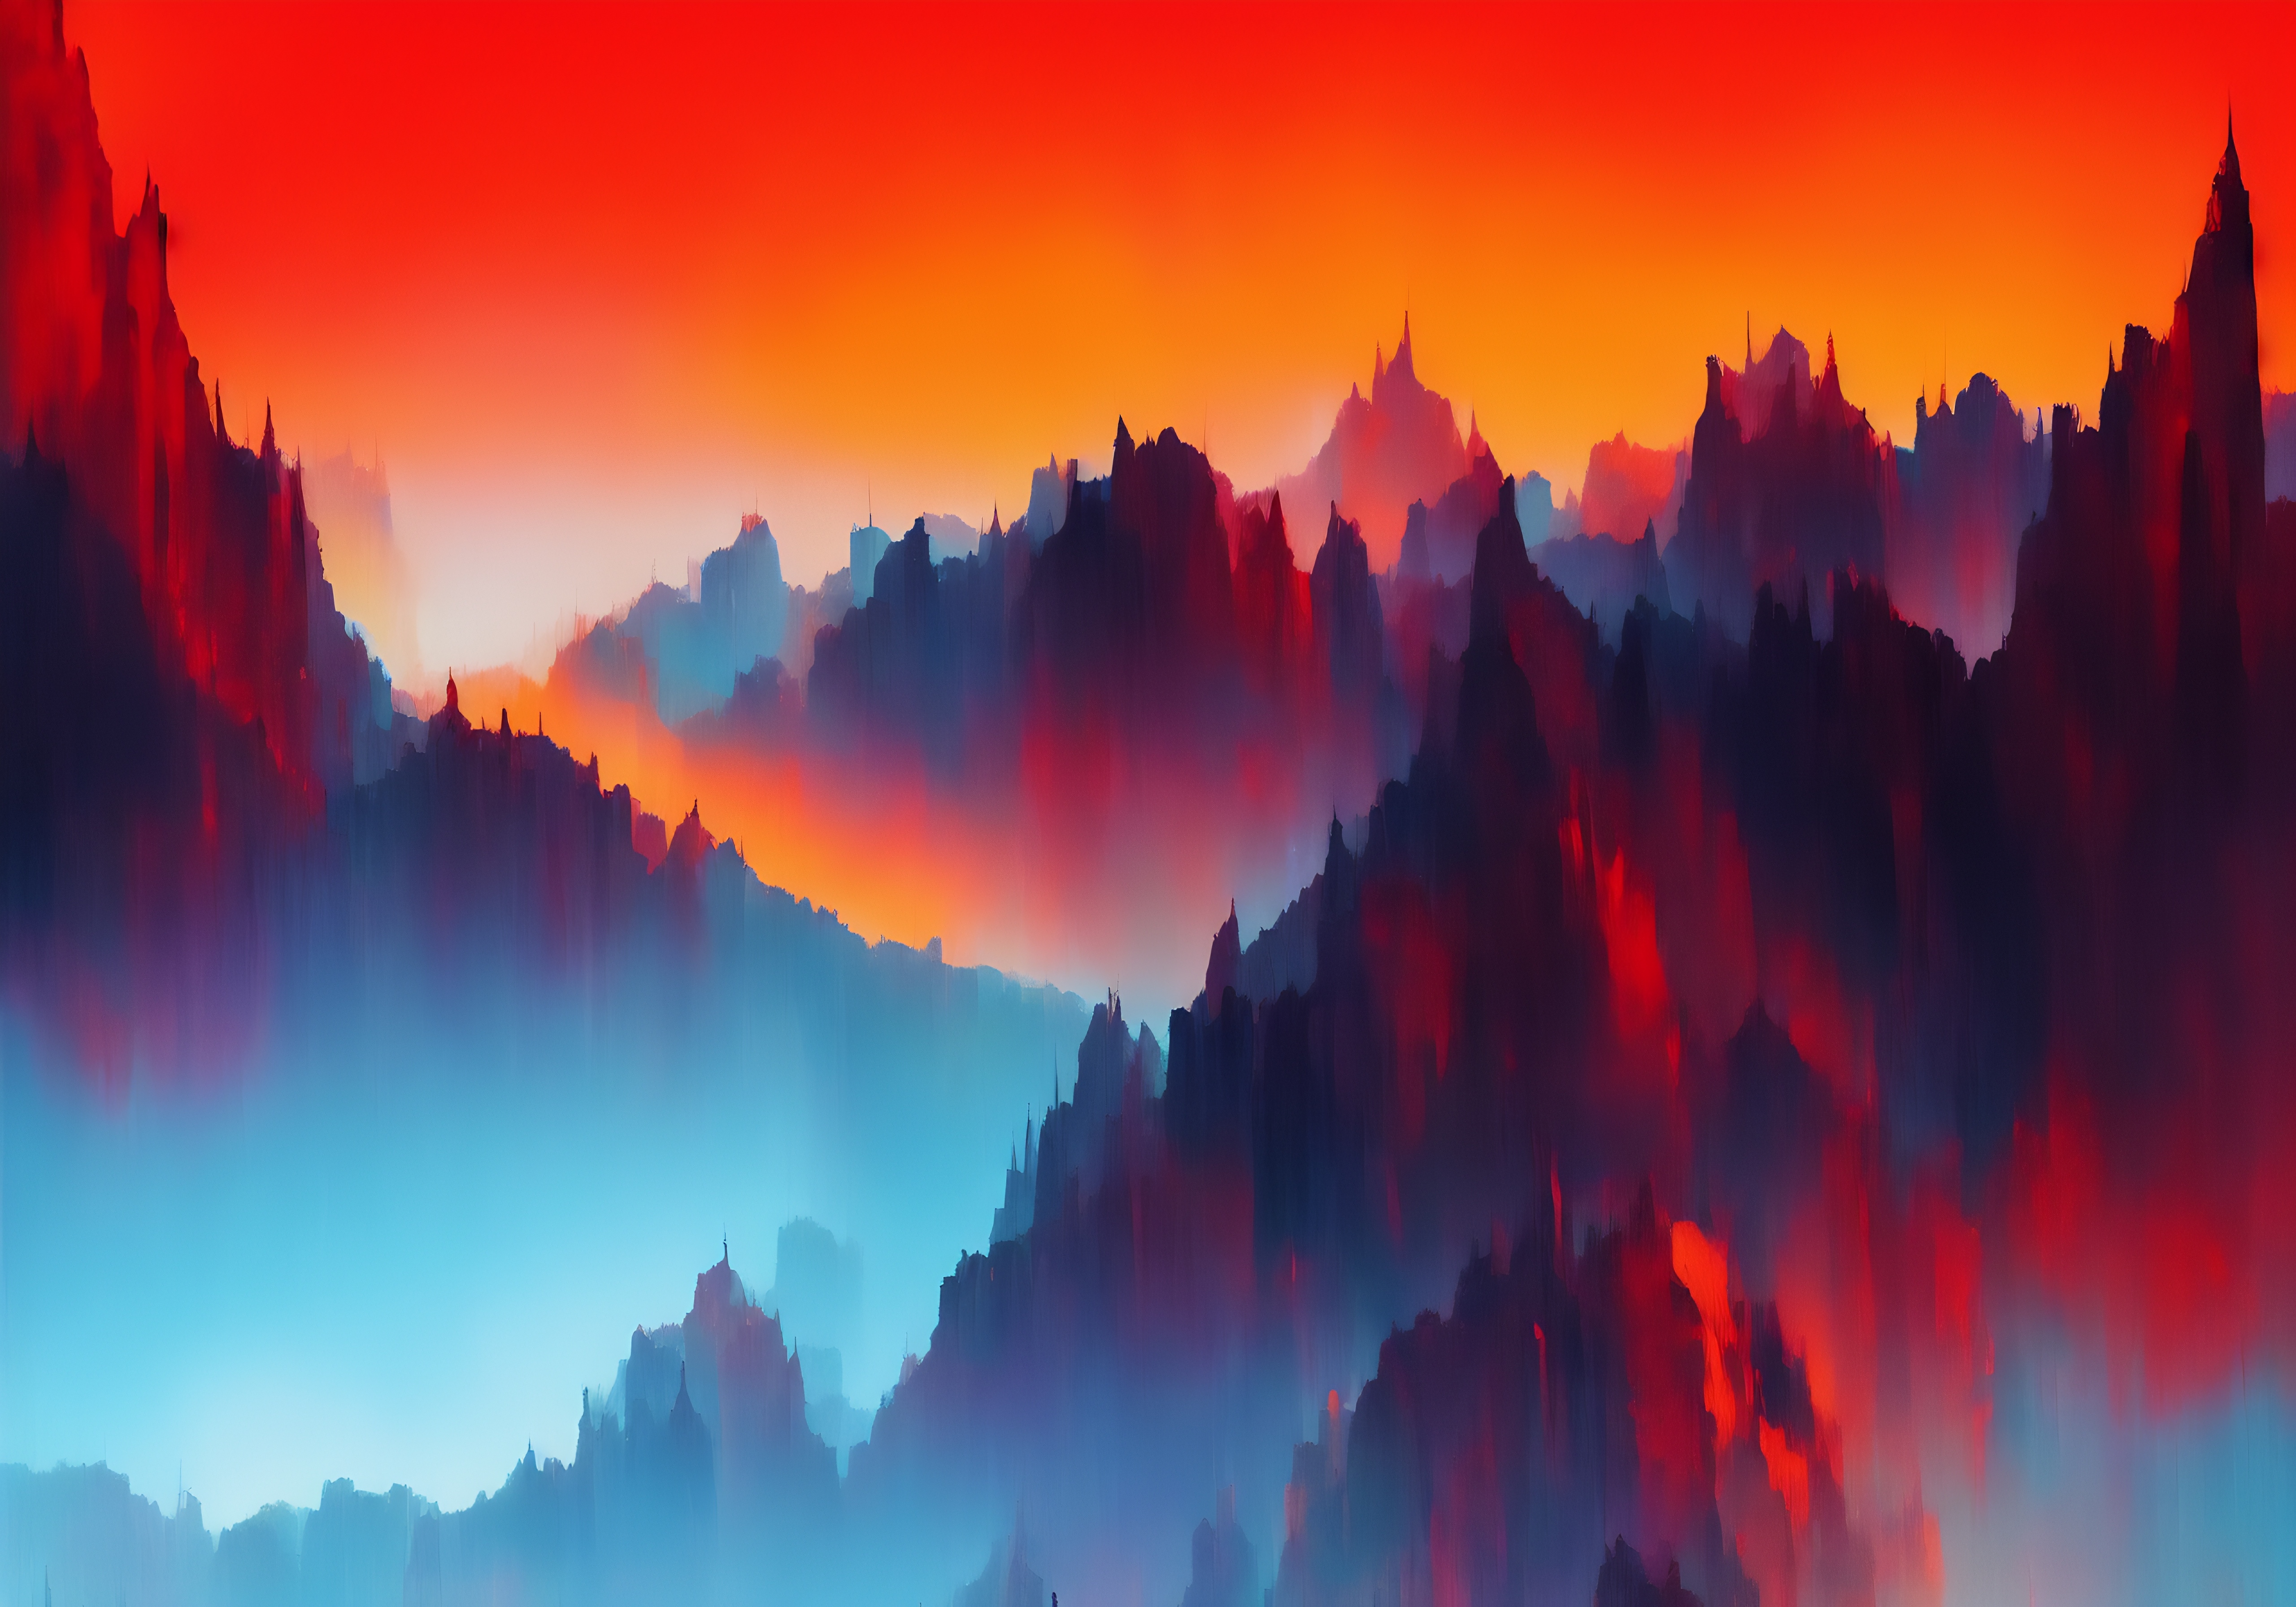 Colorful Vibrant Art Wallpapers